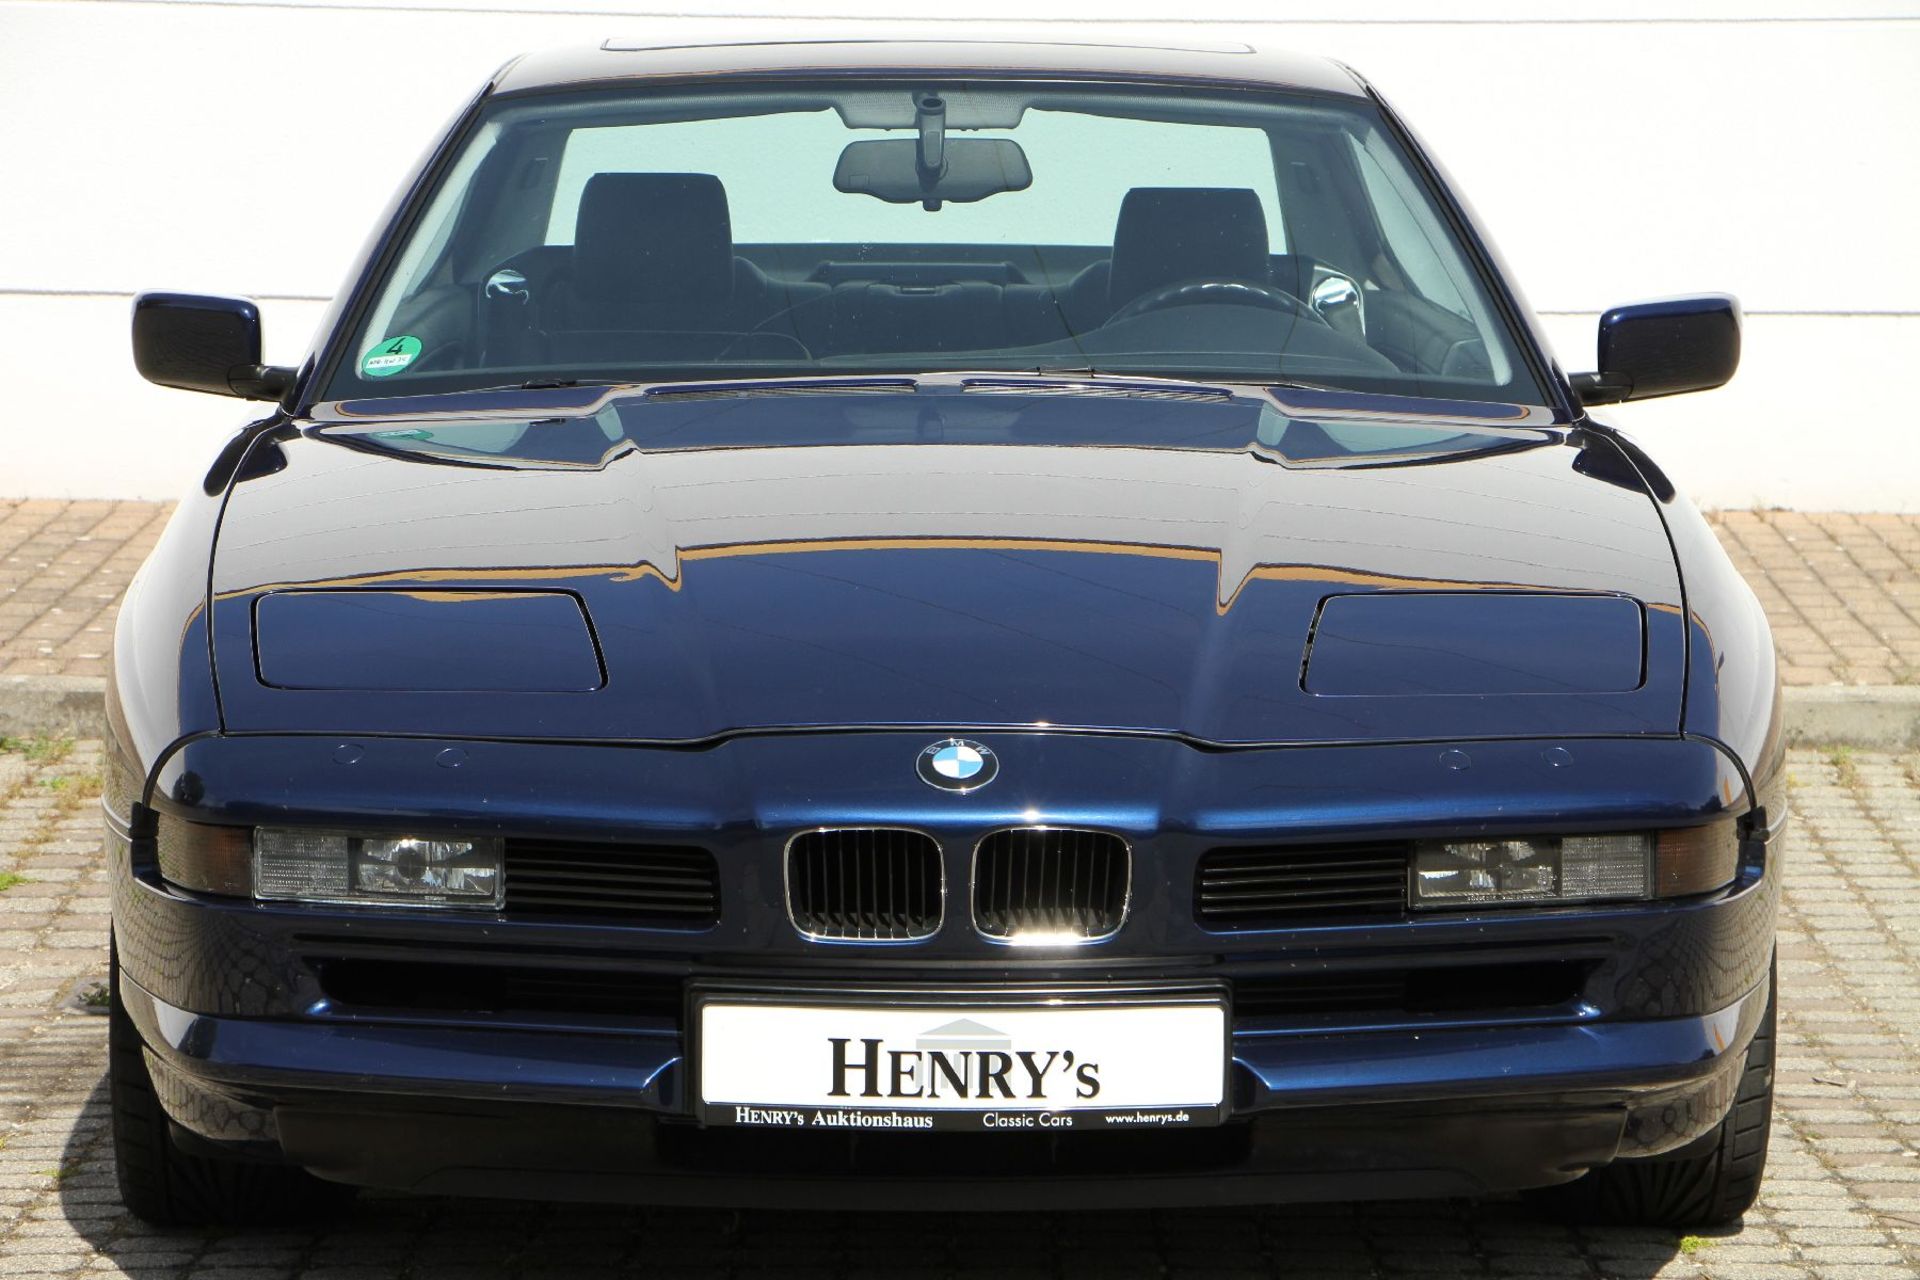 BMW 850i E31, Chassis Number: WBAEG11080CB14543, first registered 11/1992, german car with one - Bild 3 aus 21